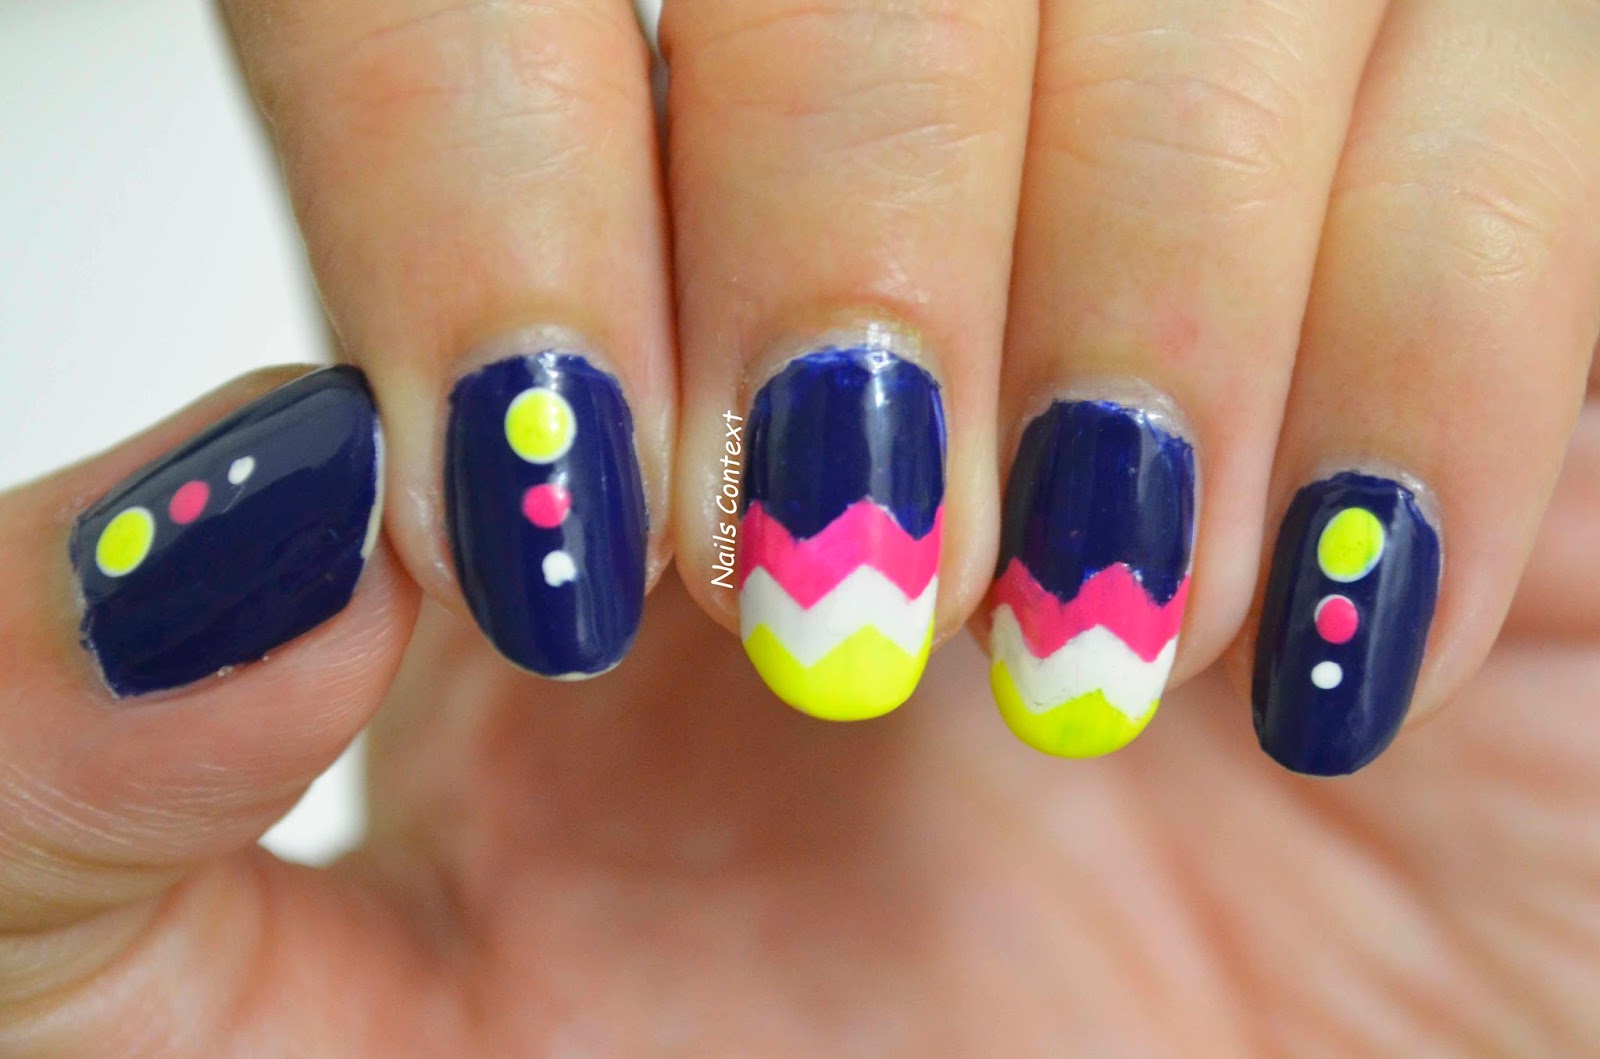 2. Chevron Nail Designs for Summer - wide 6